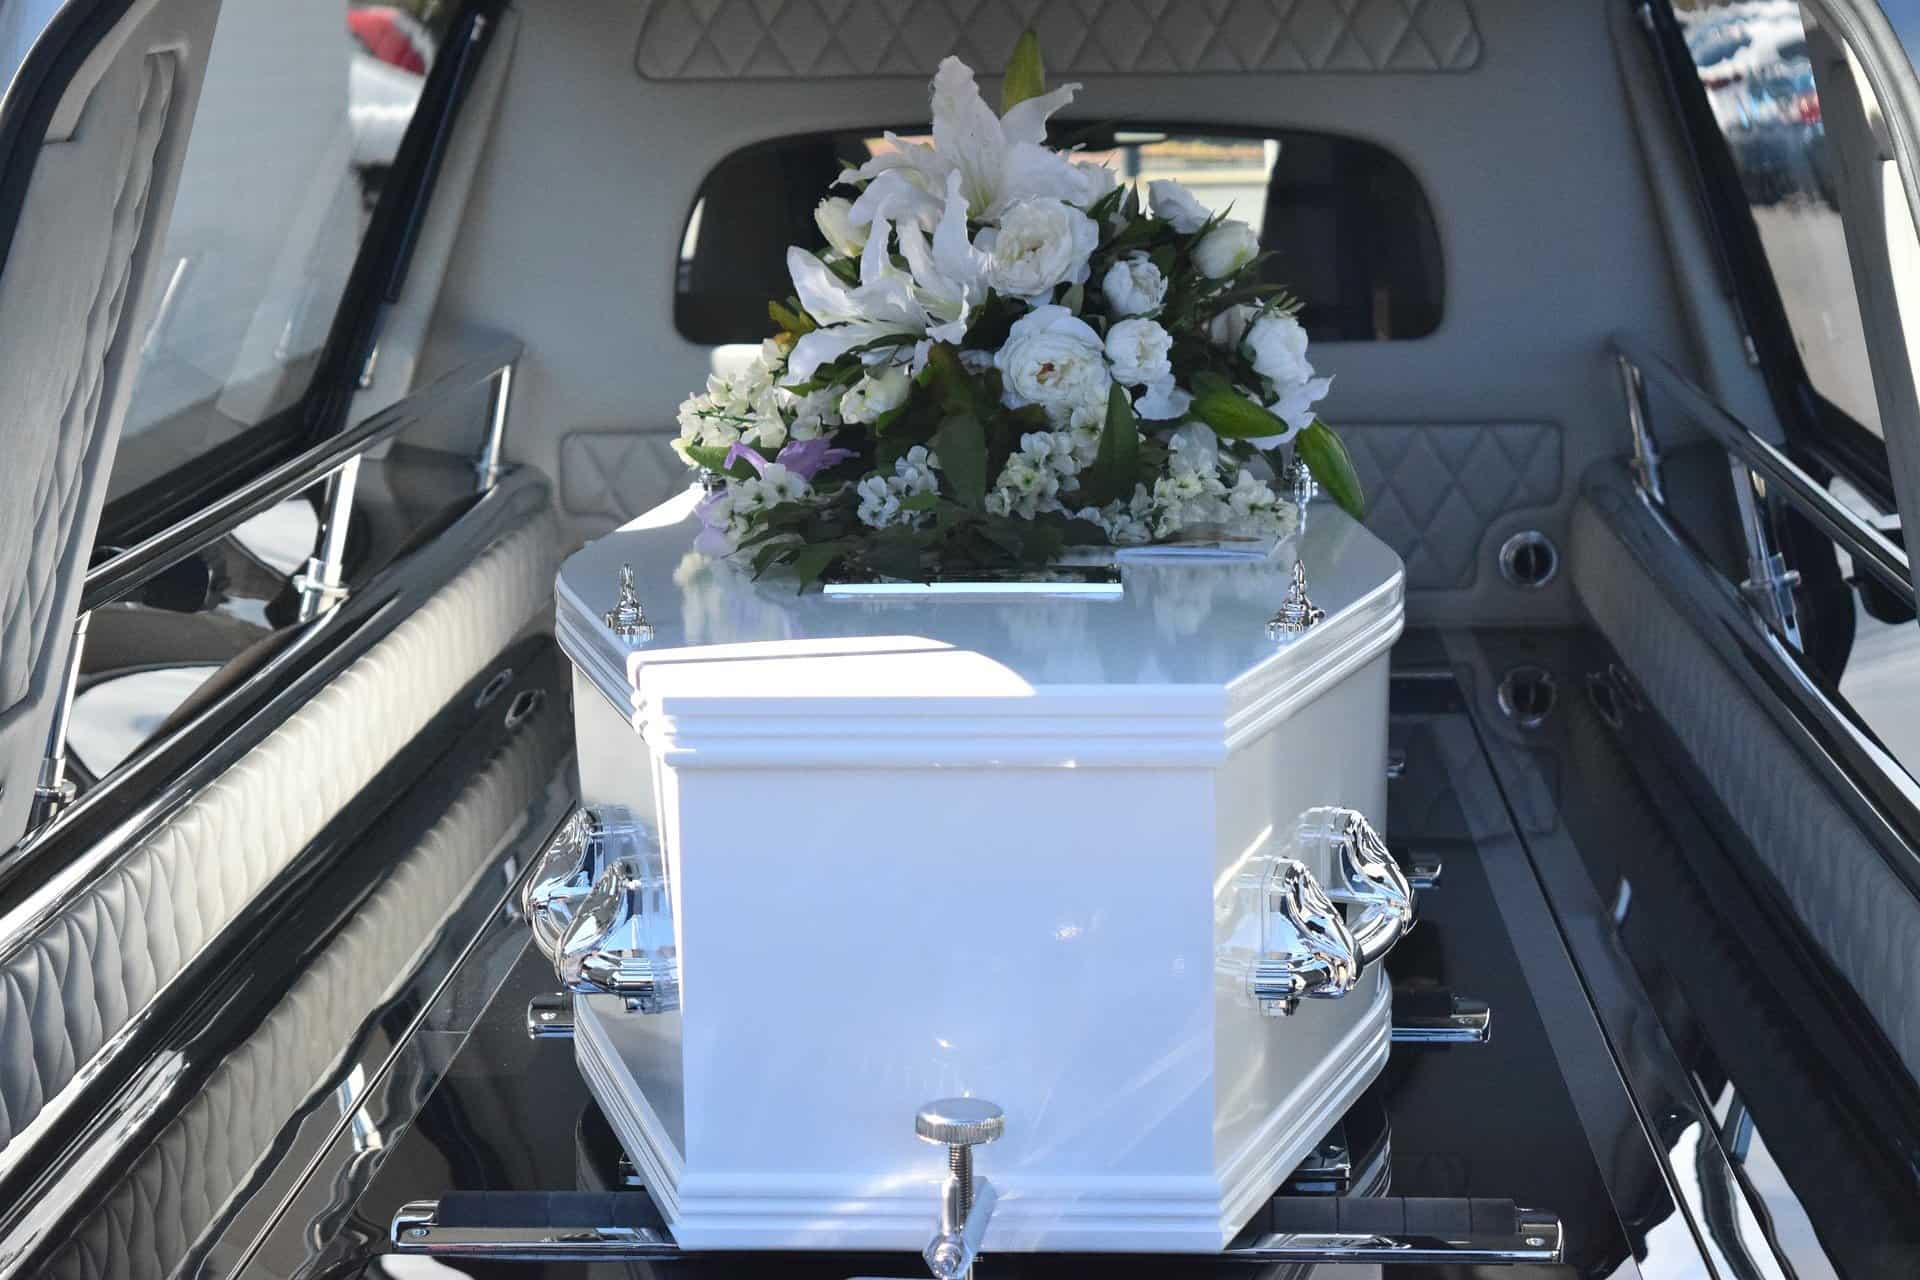 Can You Attend a Direct Funeral?